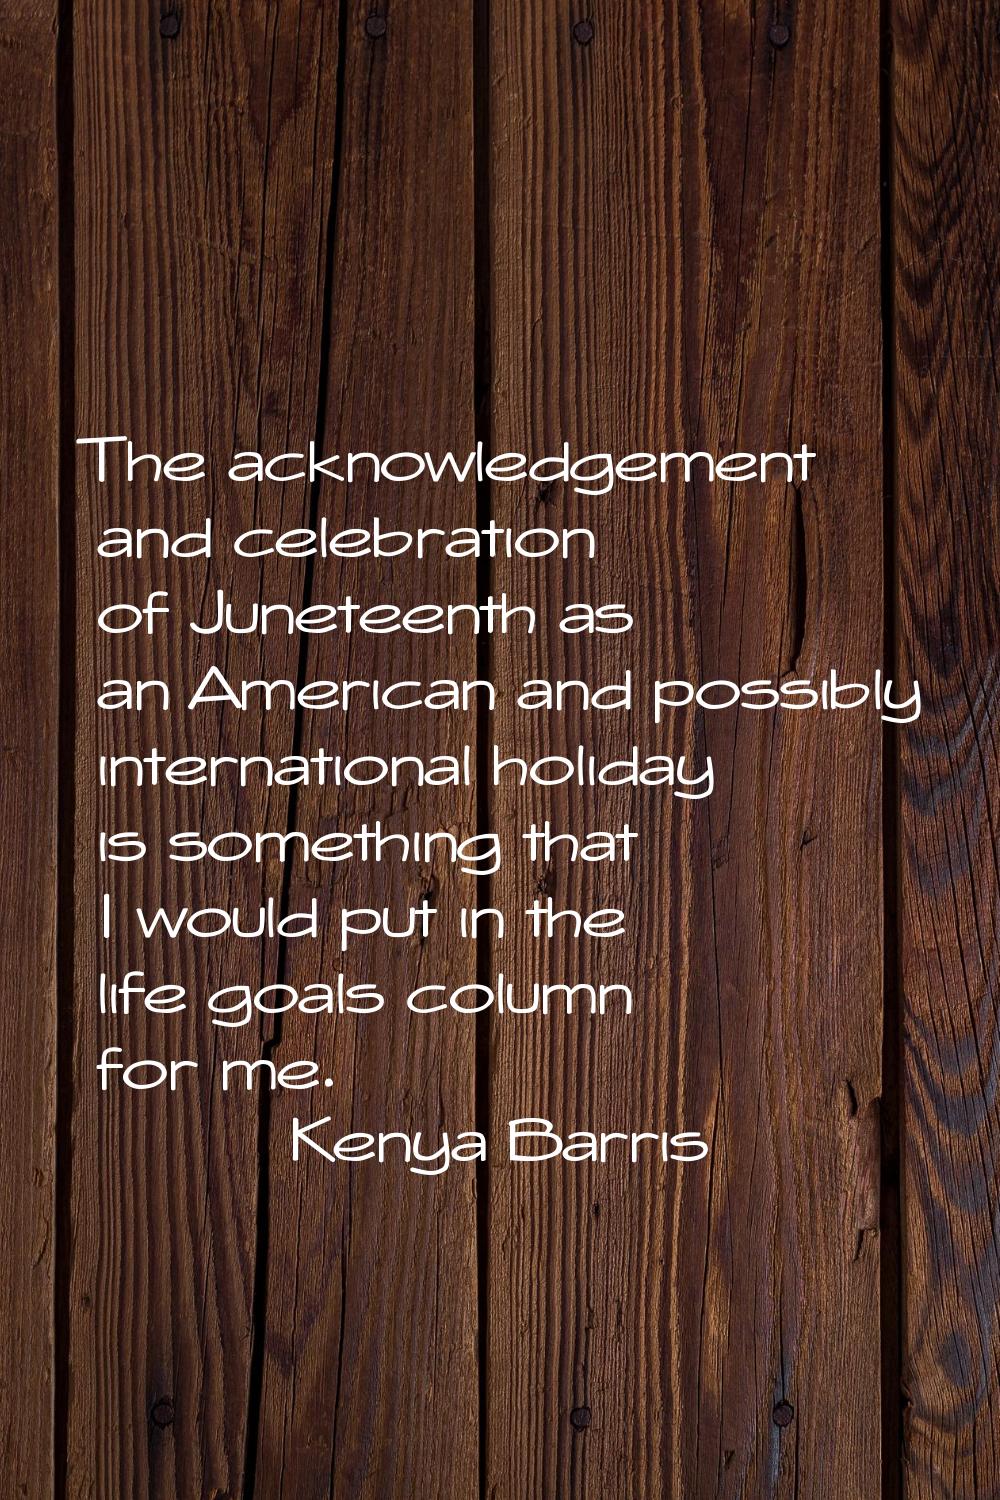 The acknowledgement and celebration of Juneteenth as an American and possibly international holiday